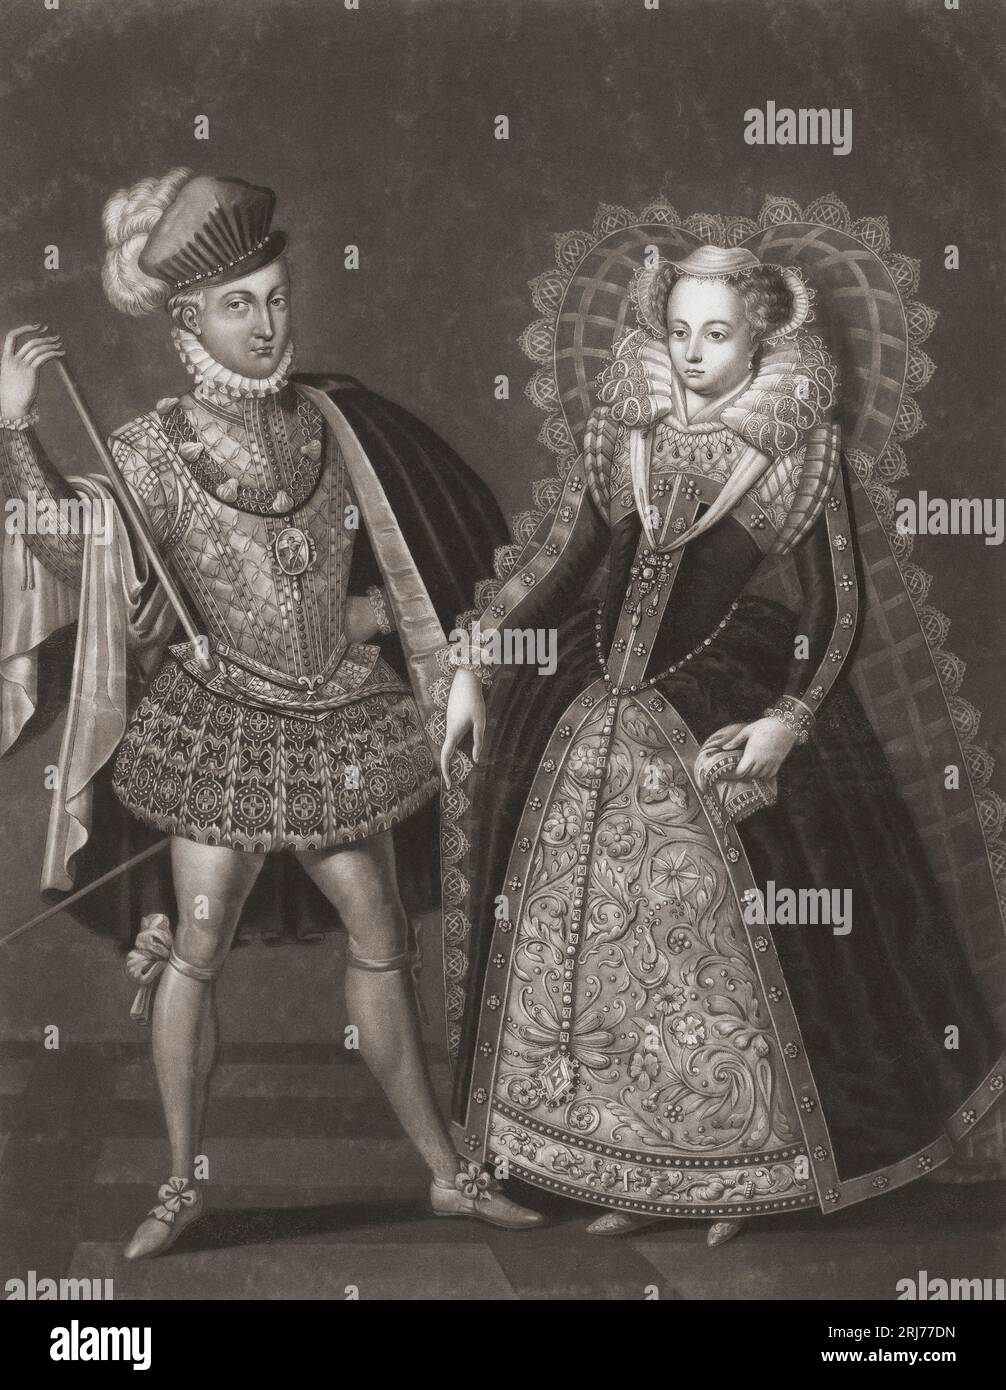 Mary, Queen of Scots also known as Mary Stuart and Mary I of Scotland, 1542 - 1587, with her husband Henry Stuart, Lord Darnley, 1546 - 1567.  After a 19th century print by Renold Elstrack. Stock Photo